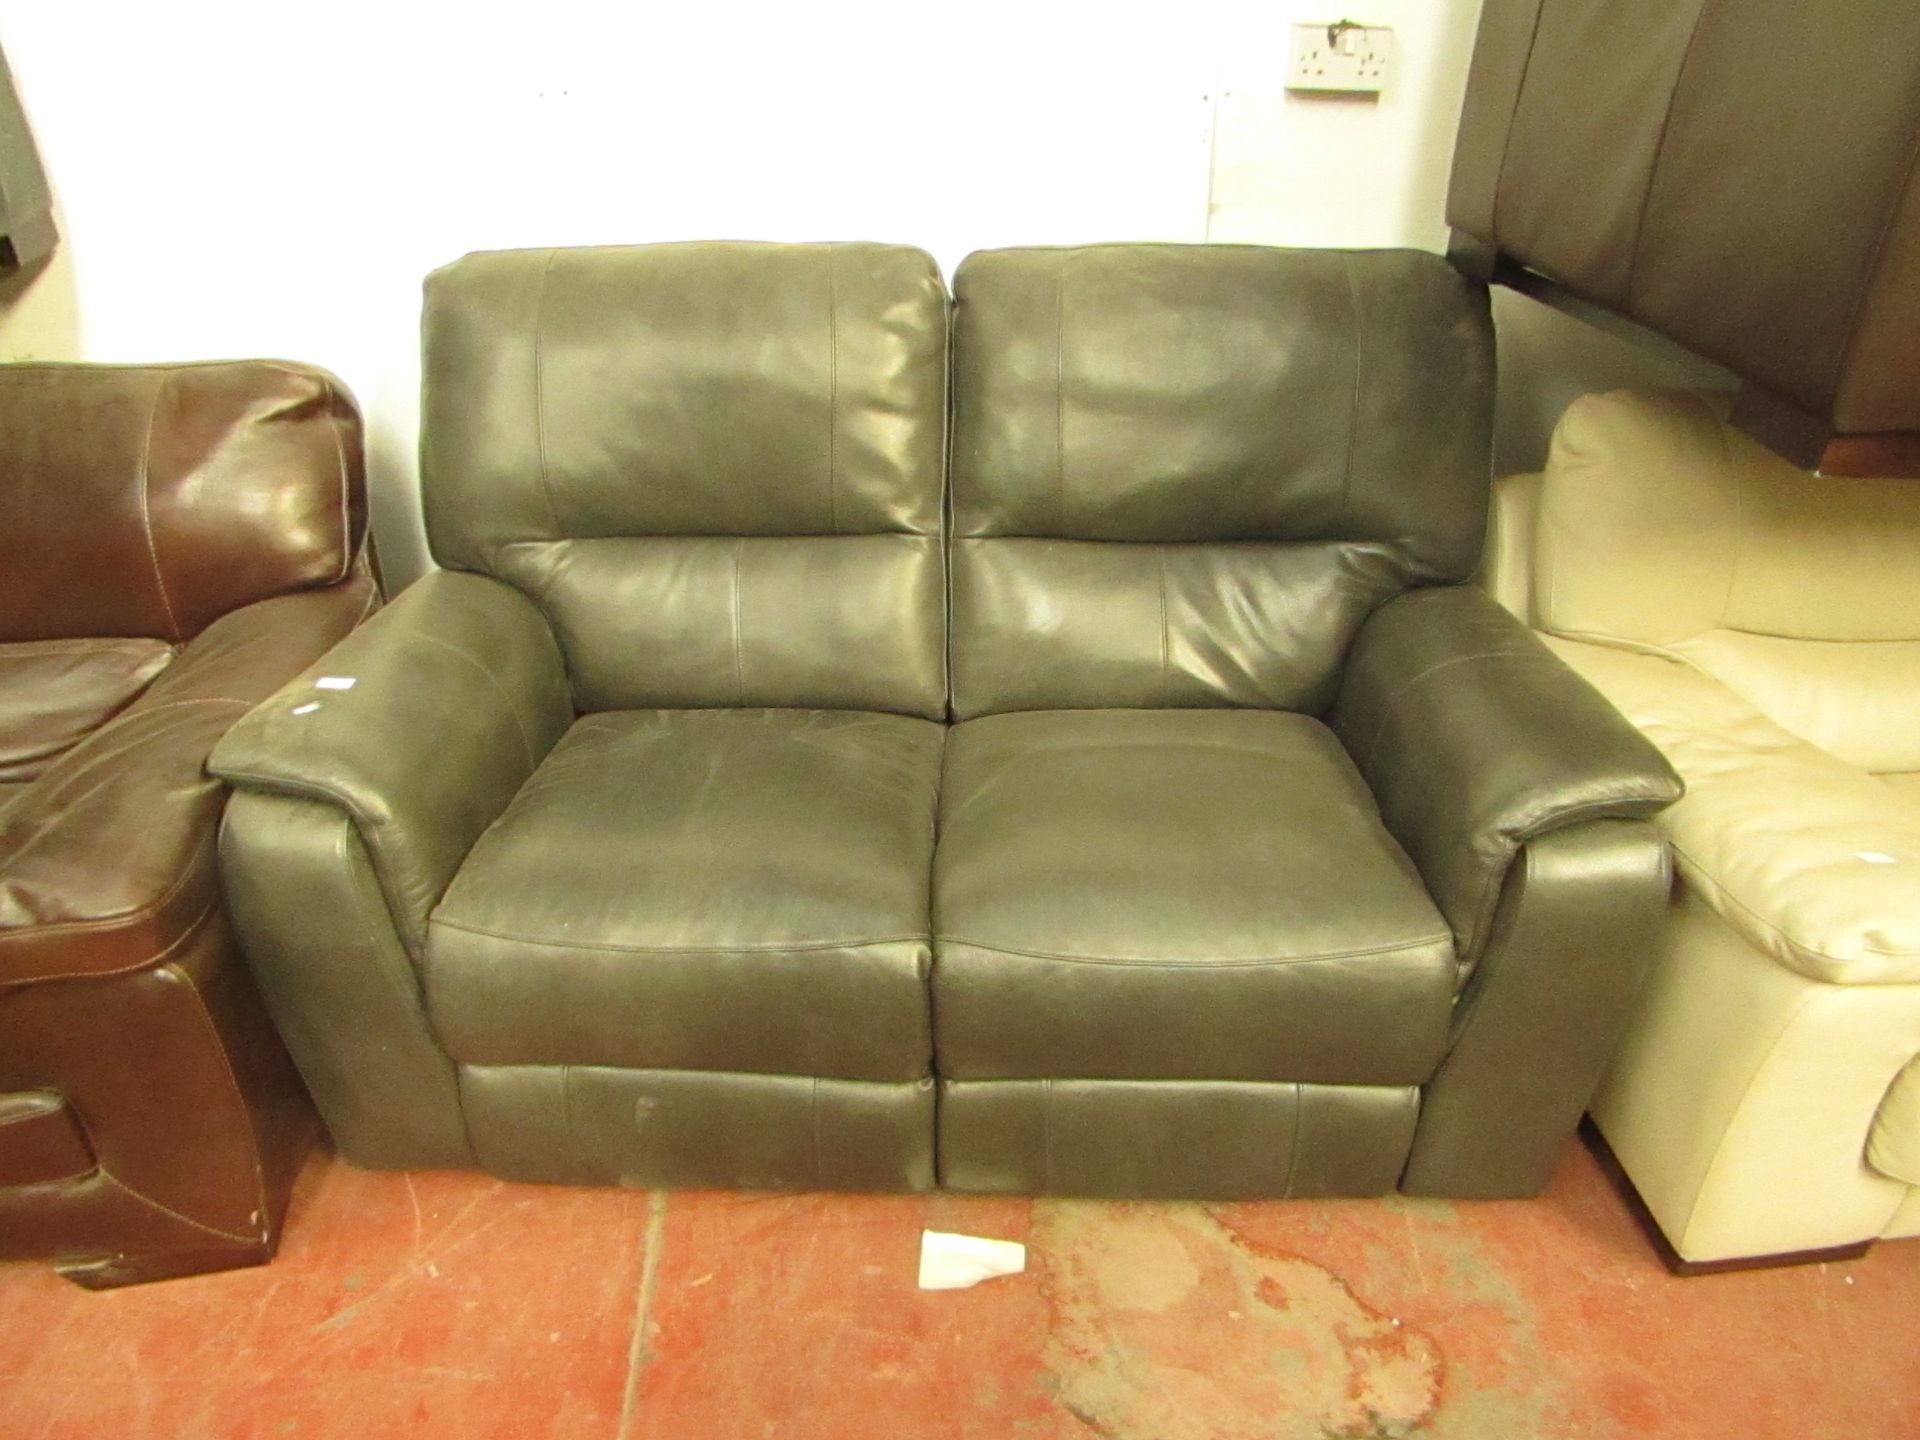 Costco 2 seater manual reclining sofa, the reclining part is working and the sofa has no major